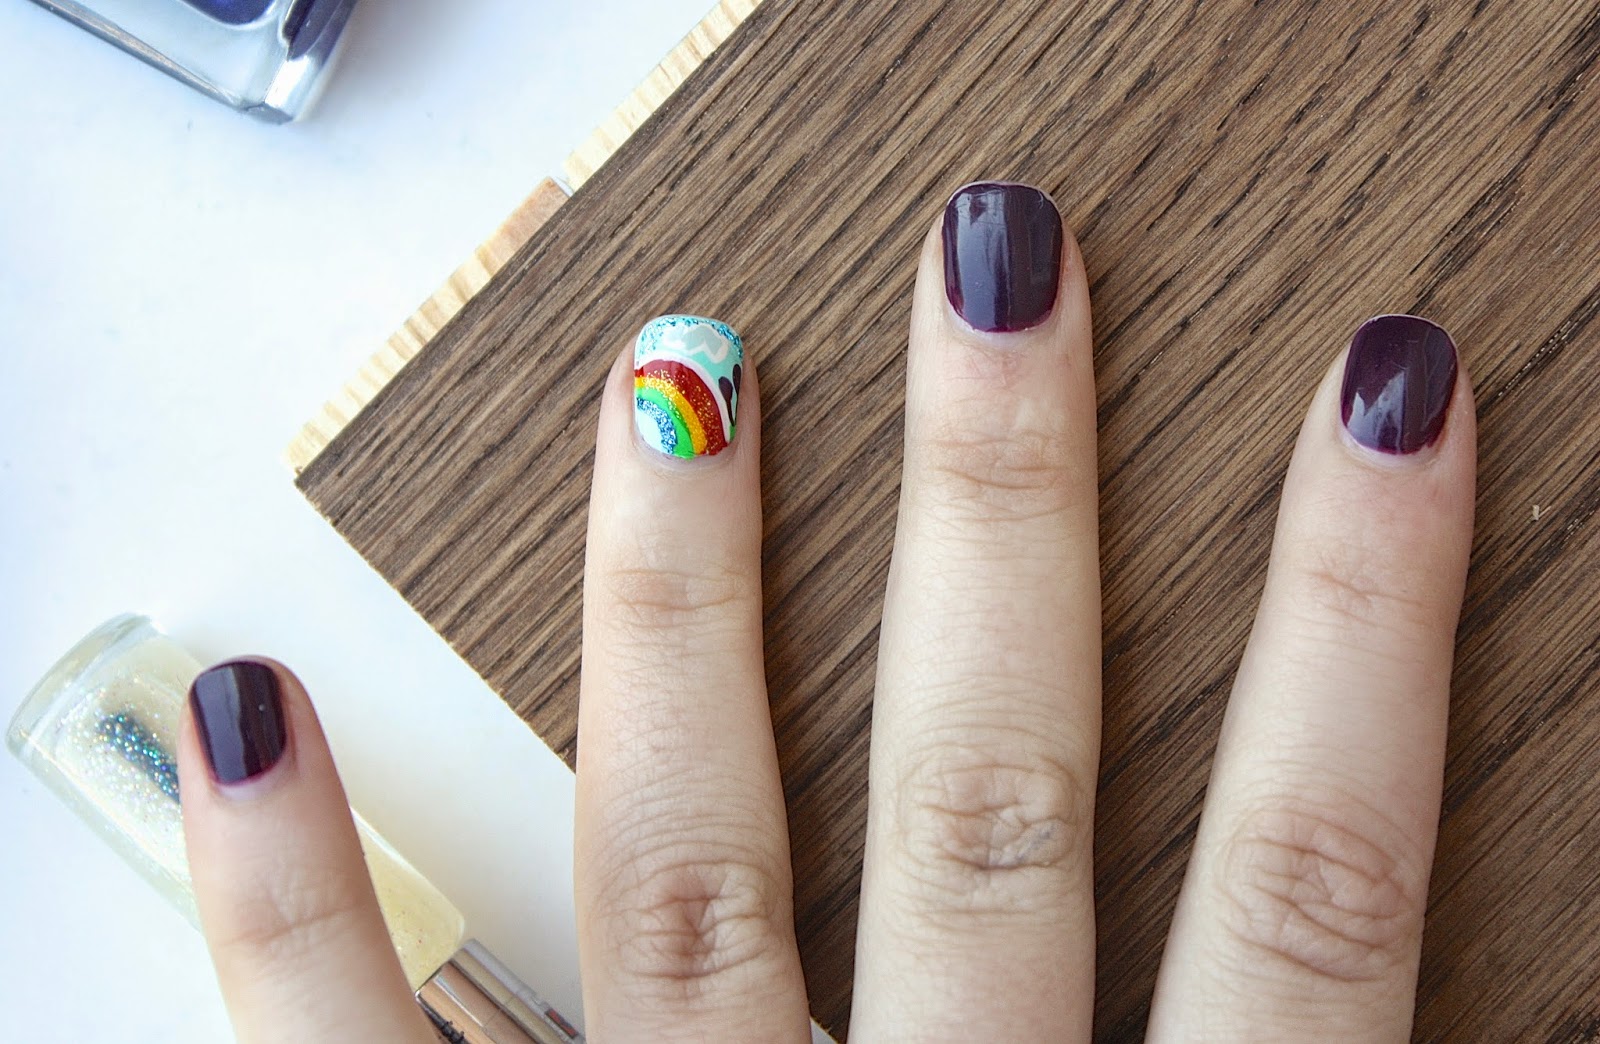 1. One-Handed Nail Art: Tips and Tricks - wide 3